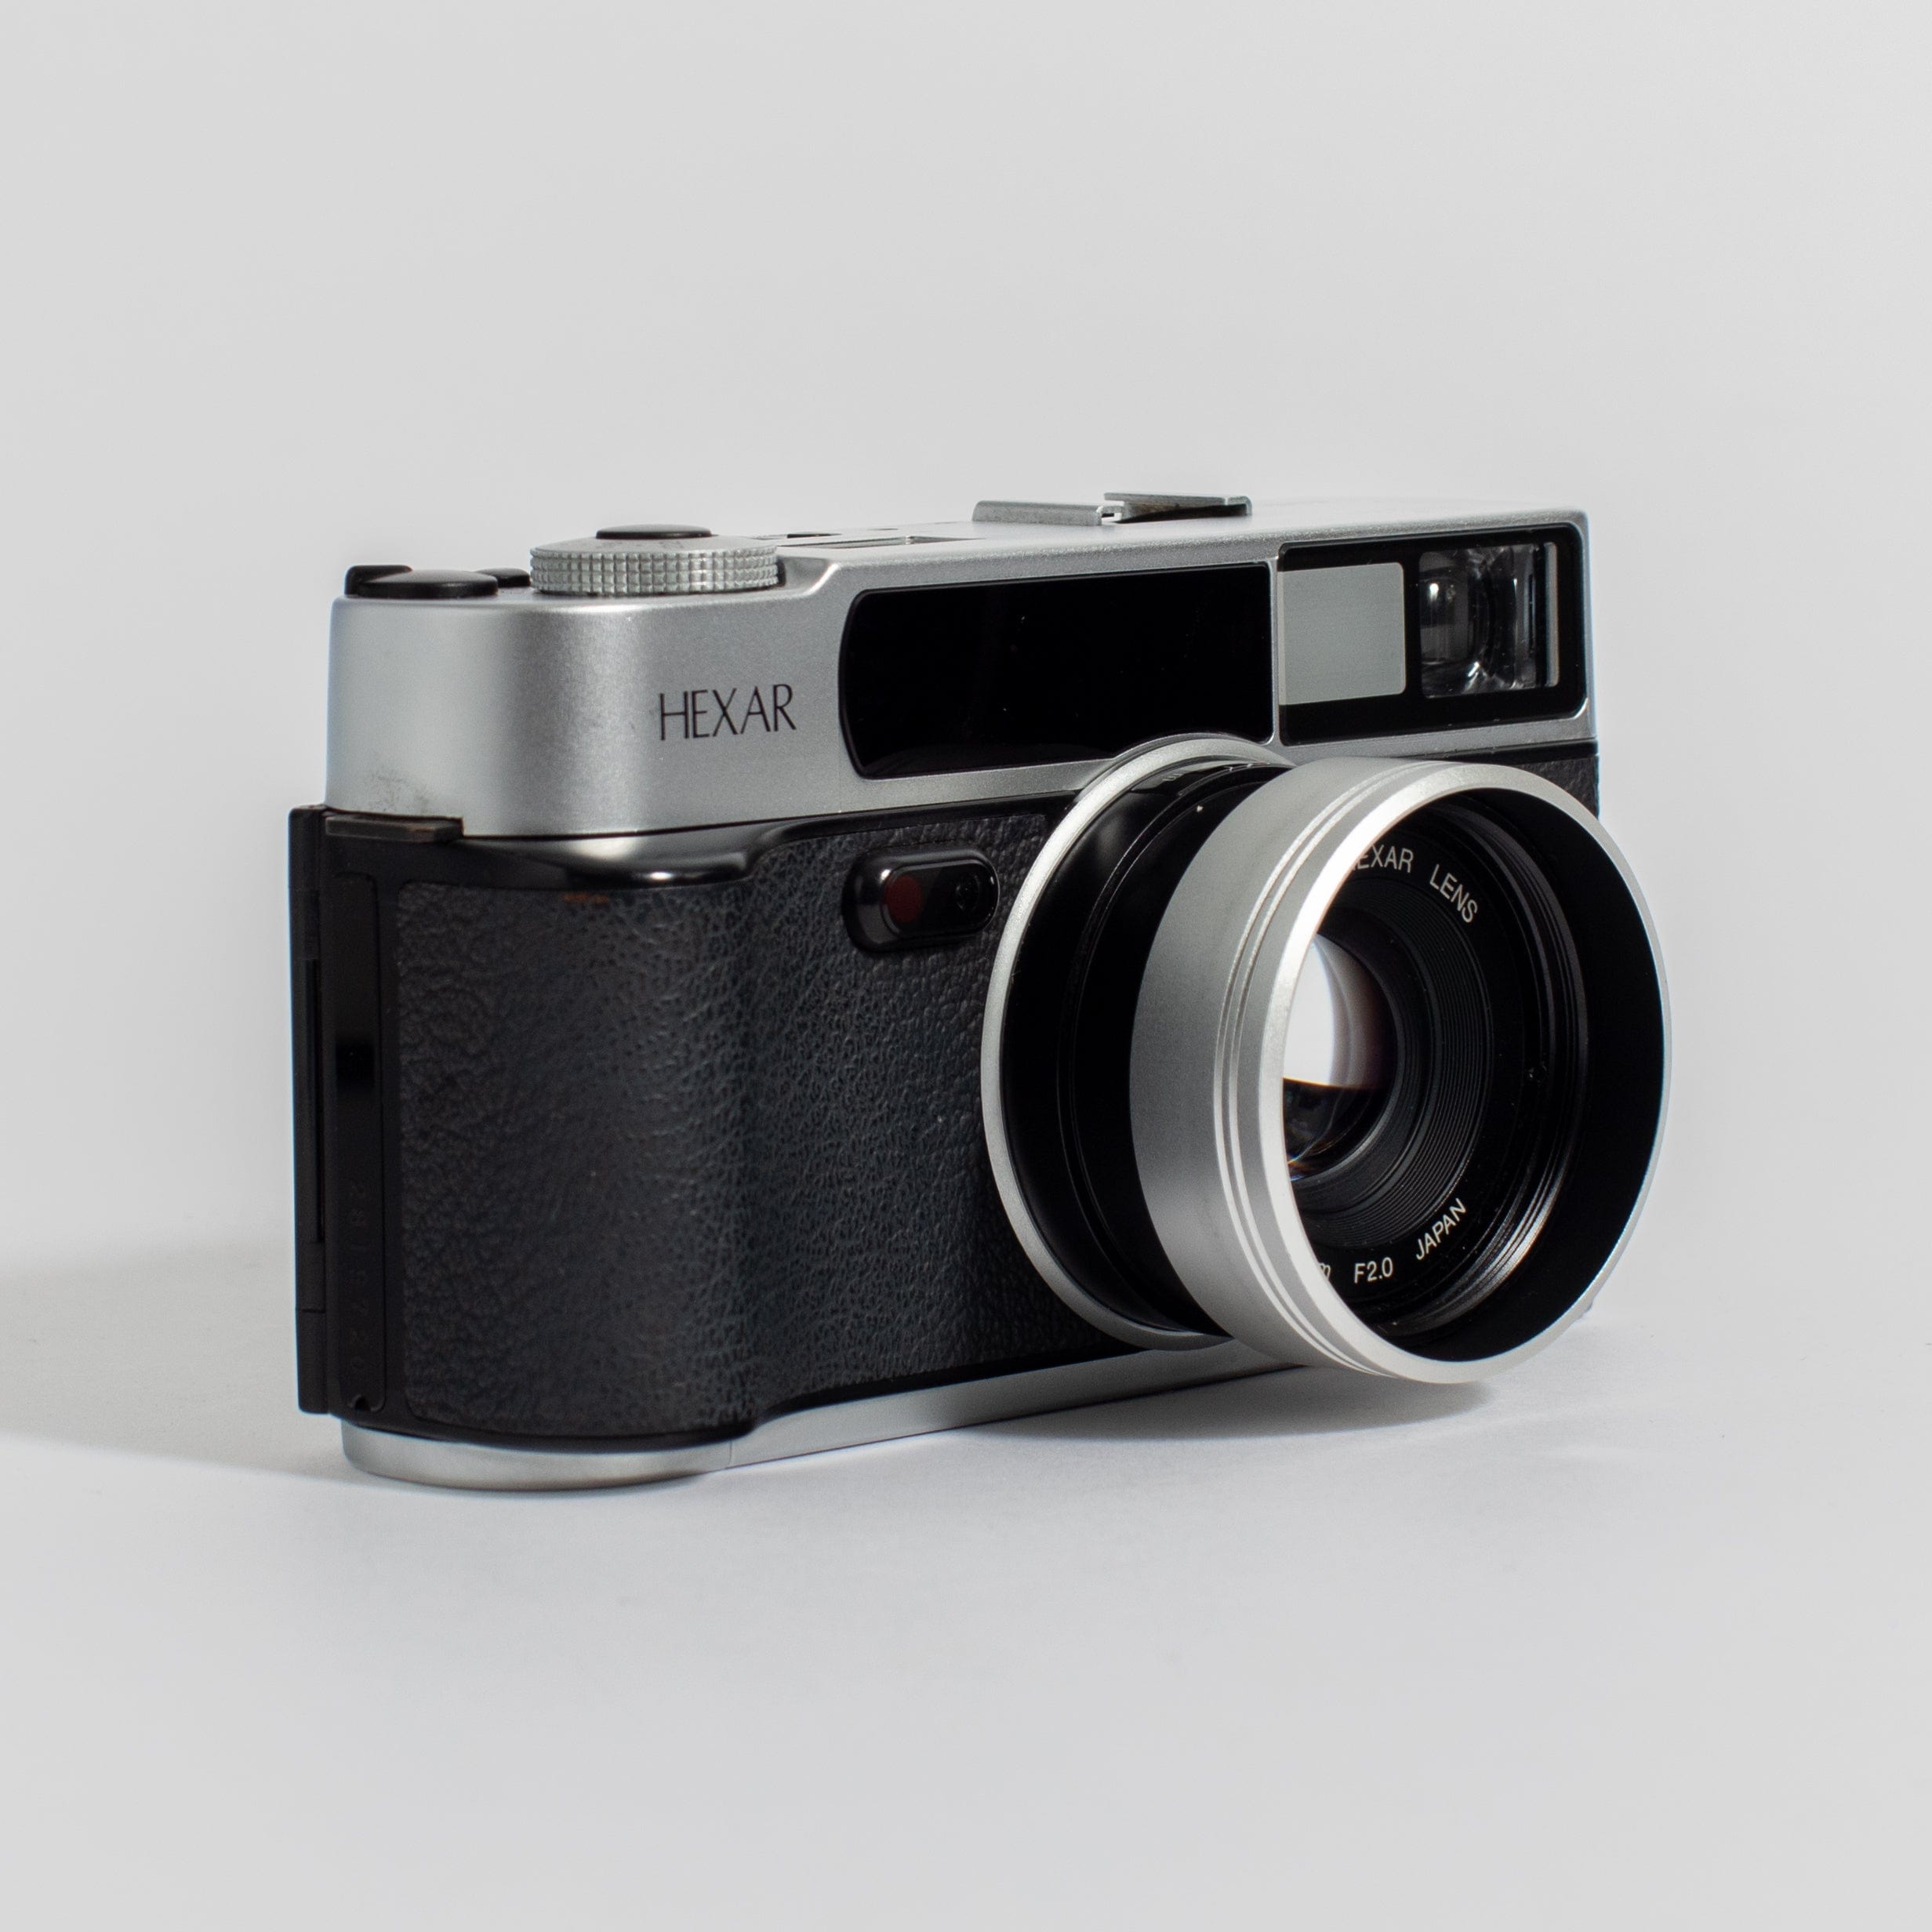 Konica Hexar Silver with 35mm f2 lens, leather case, and strap 